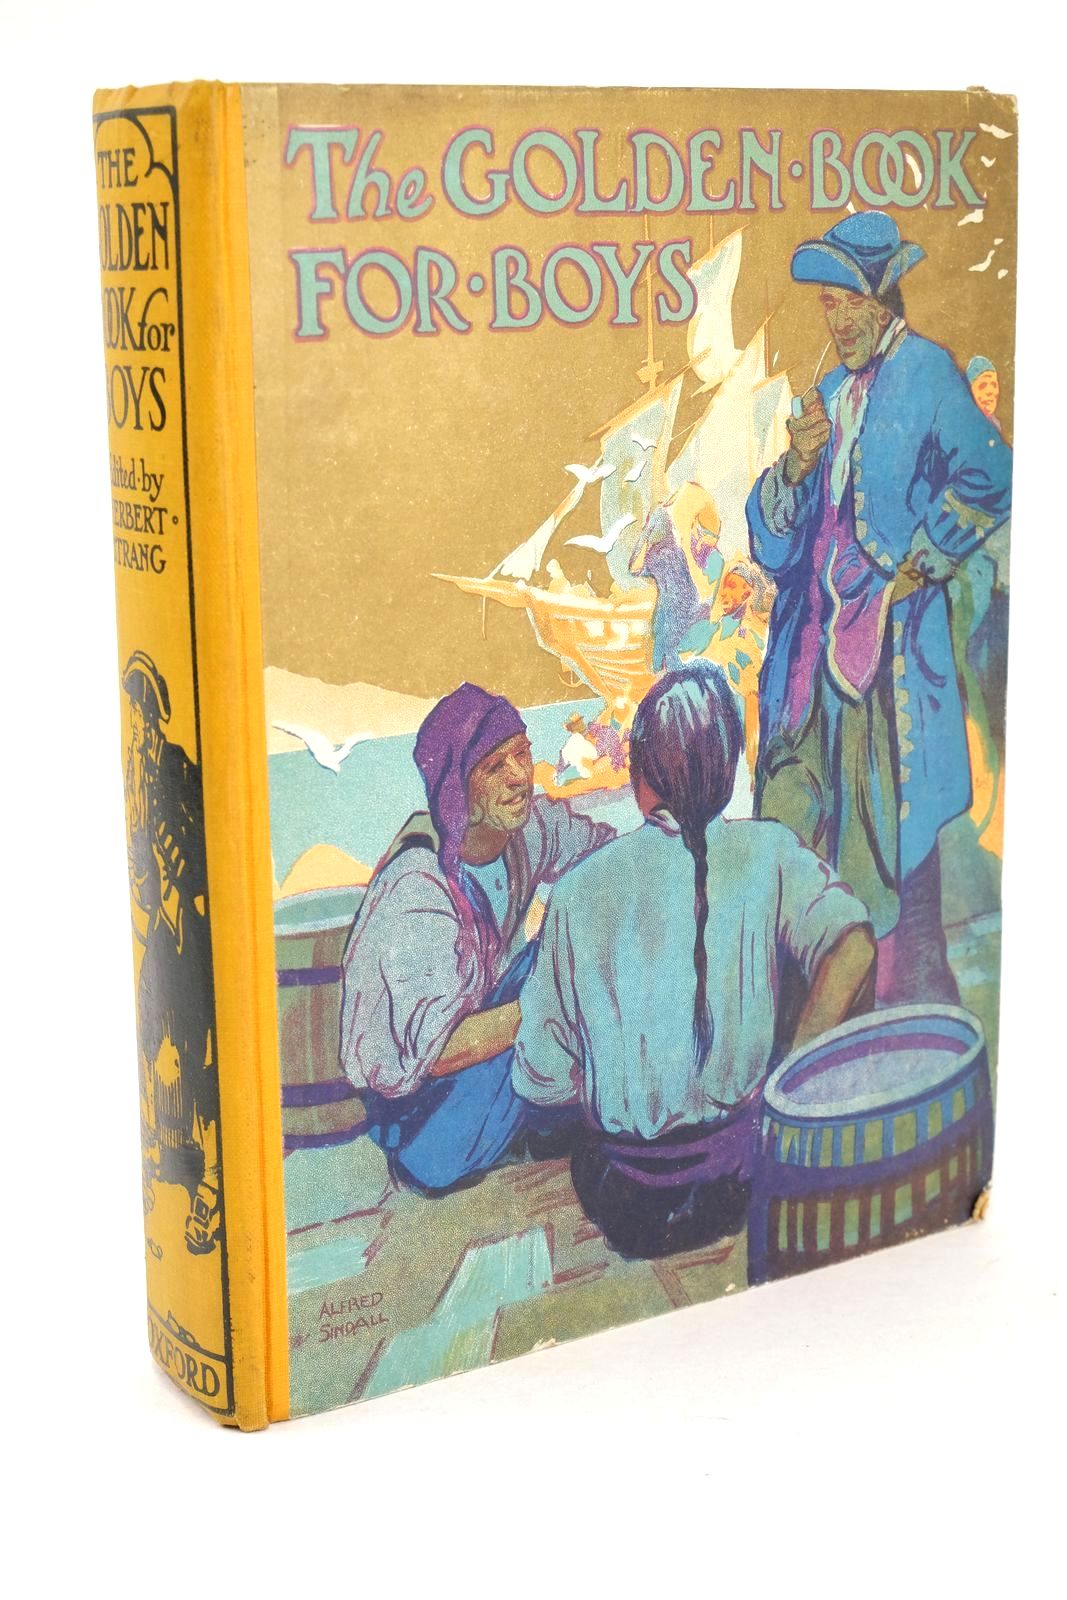 Photo of THE GOLDEN BOOK FOR BOYS written by Strang, Herbert Bourne, Lawrence R. Avery, Harold Edwards, Lionel et al, illustrated by Webb, Arch Brock, R.H. Brock, C.E. Edwards, Lionel et al., published by Humphrey Milford, Oxford University Press (STOCK CODE: 1325500)  for sale by Stella & Rose's Books